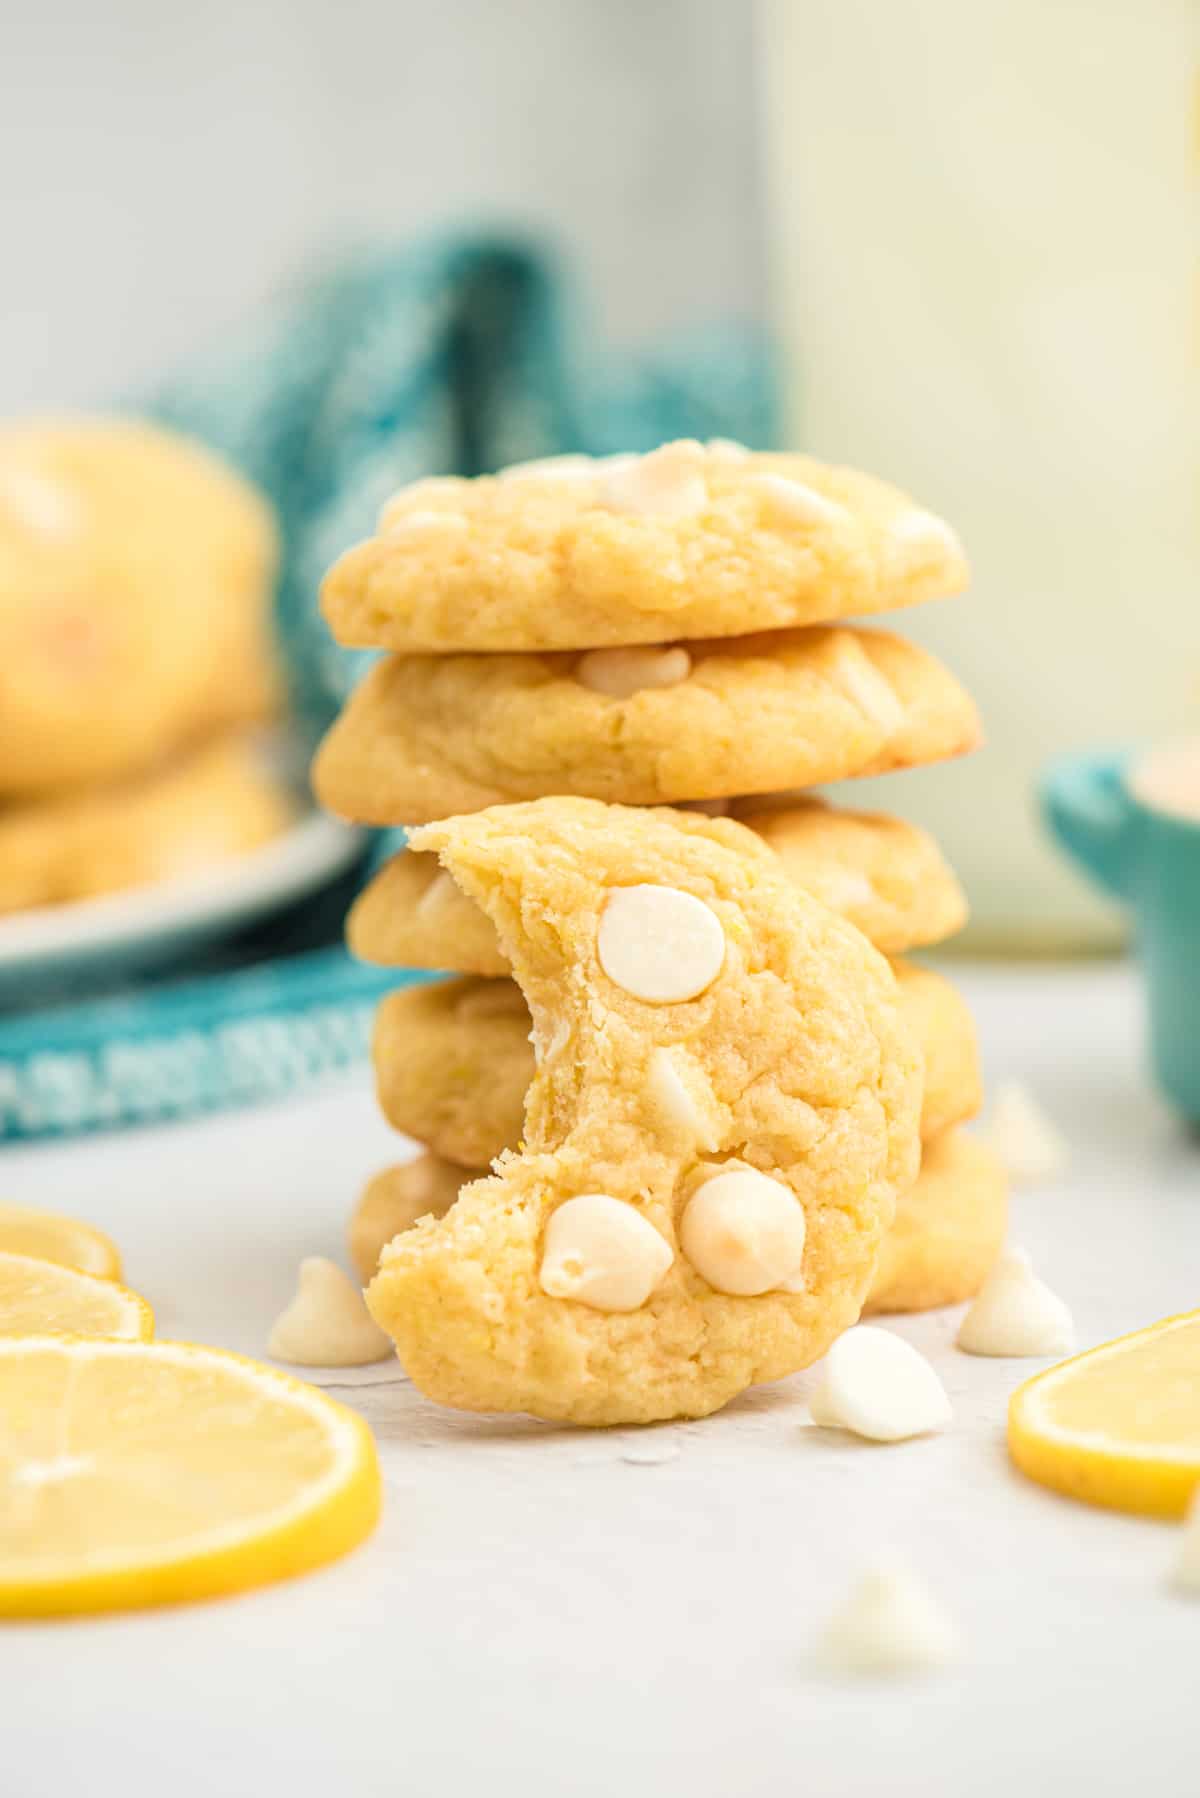 Lemon cookies with white chocolate chips stacked on top of one another. One cookie is leaning on front of the stack with a bite taken out of it.